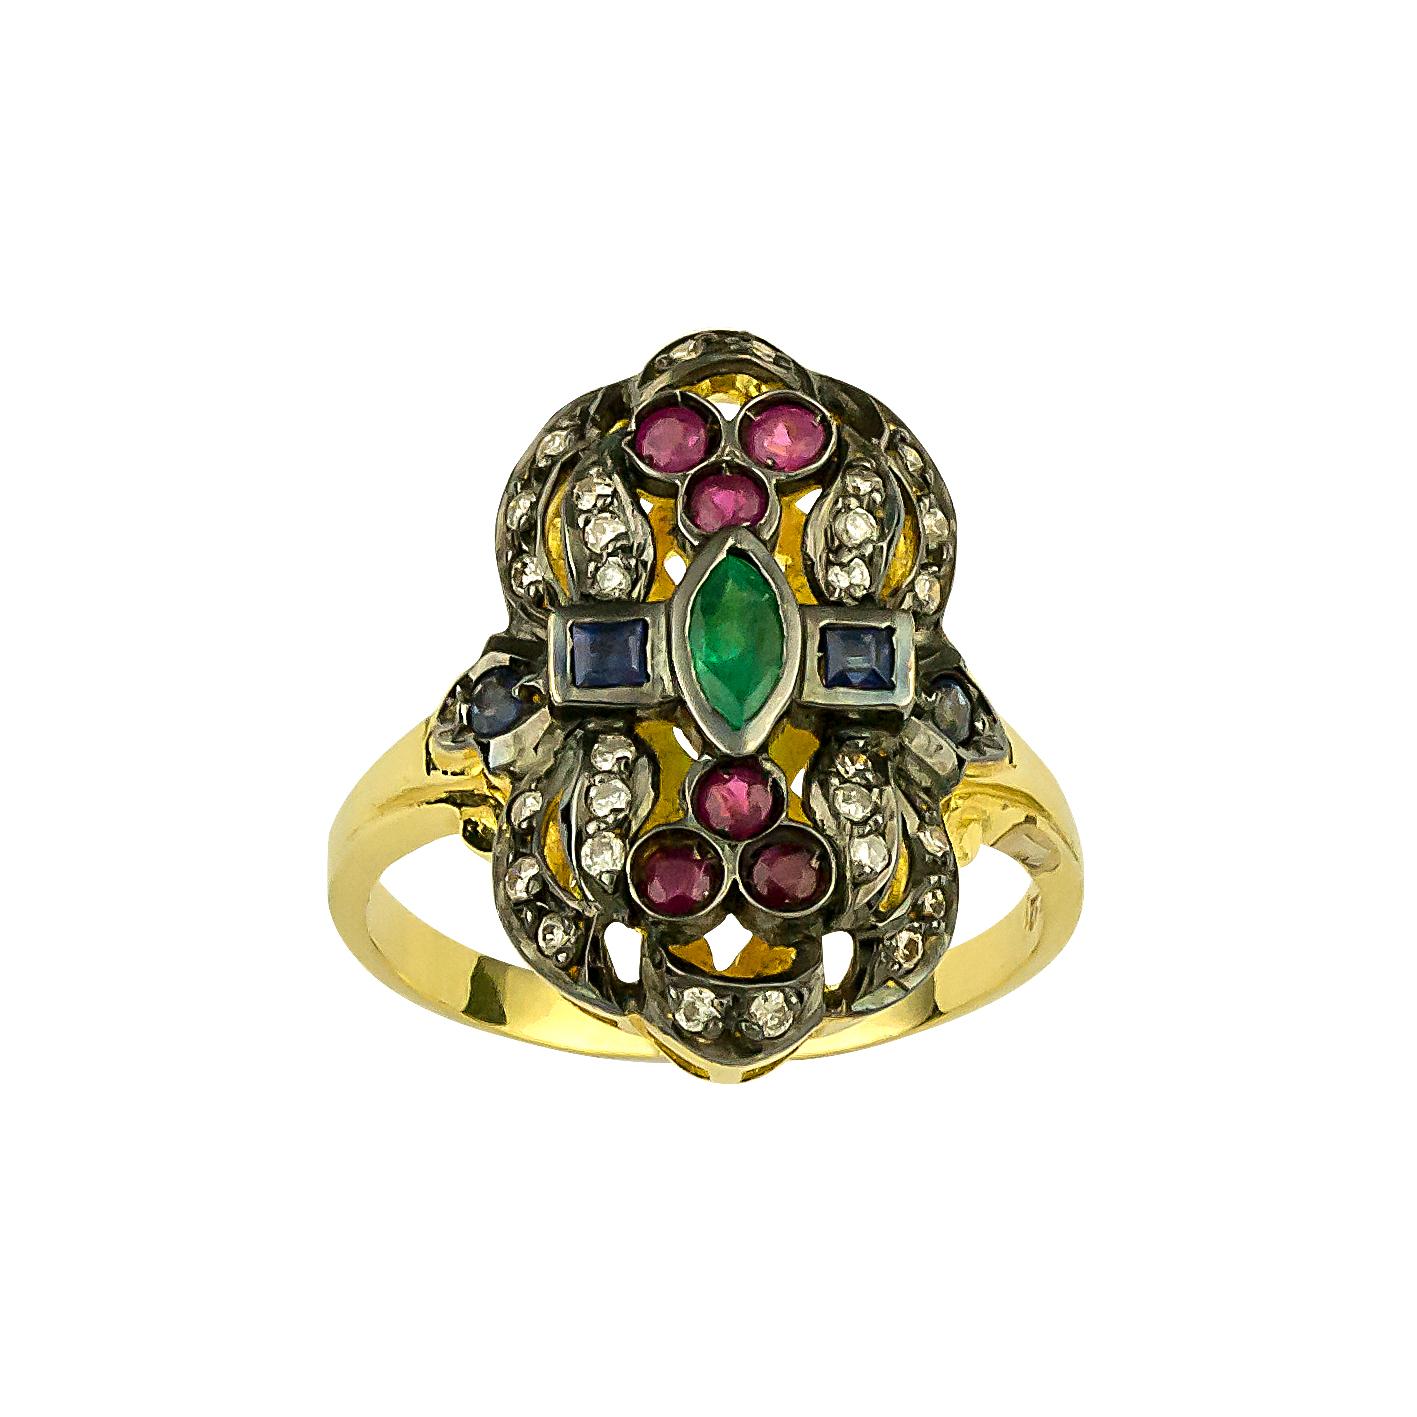 S.Georgios designer 18 Karat yellow gold Two-tone ring is handmade and decorated with Byzantine-style granulation and a combination of Diamonds, Rubies, Sapphires, and a center Emerald, and a unique black rhodium finish giving it a stunning